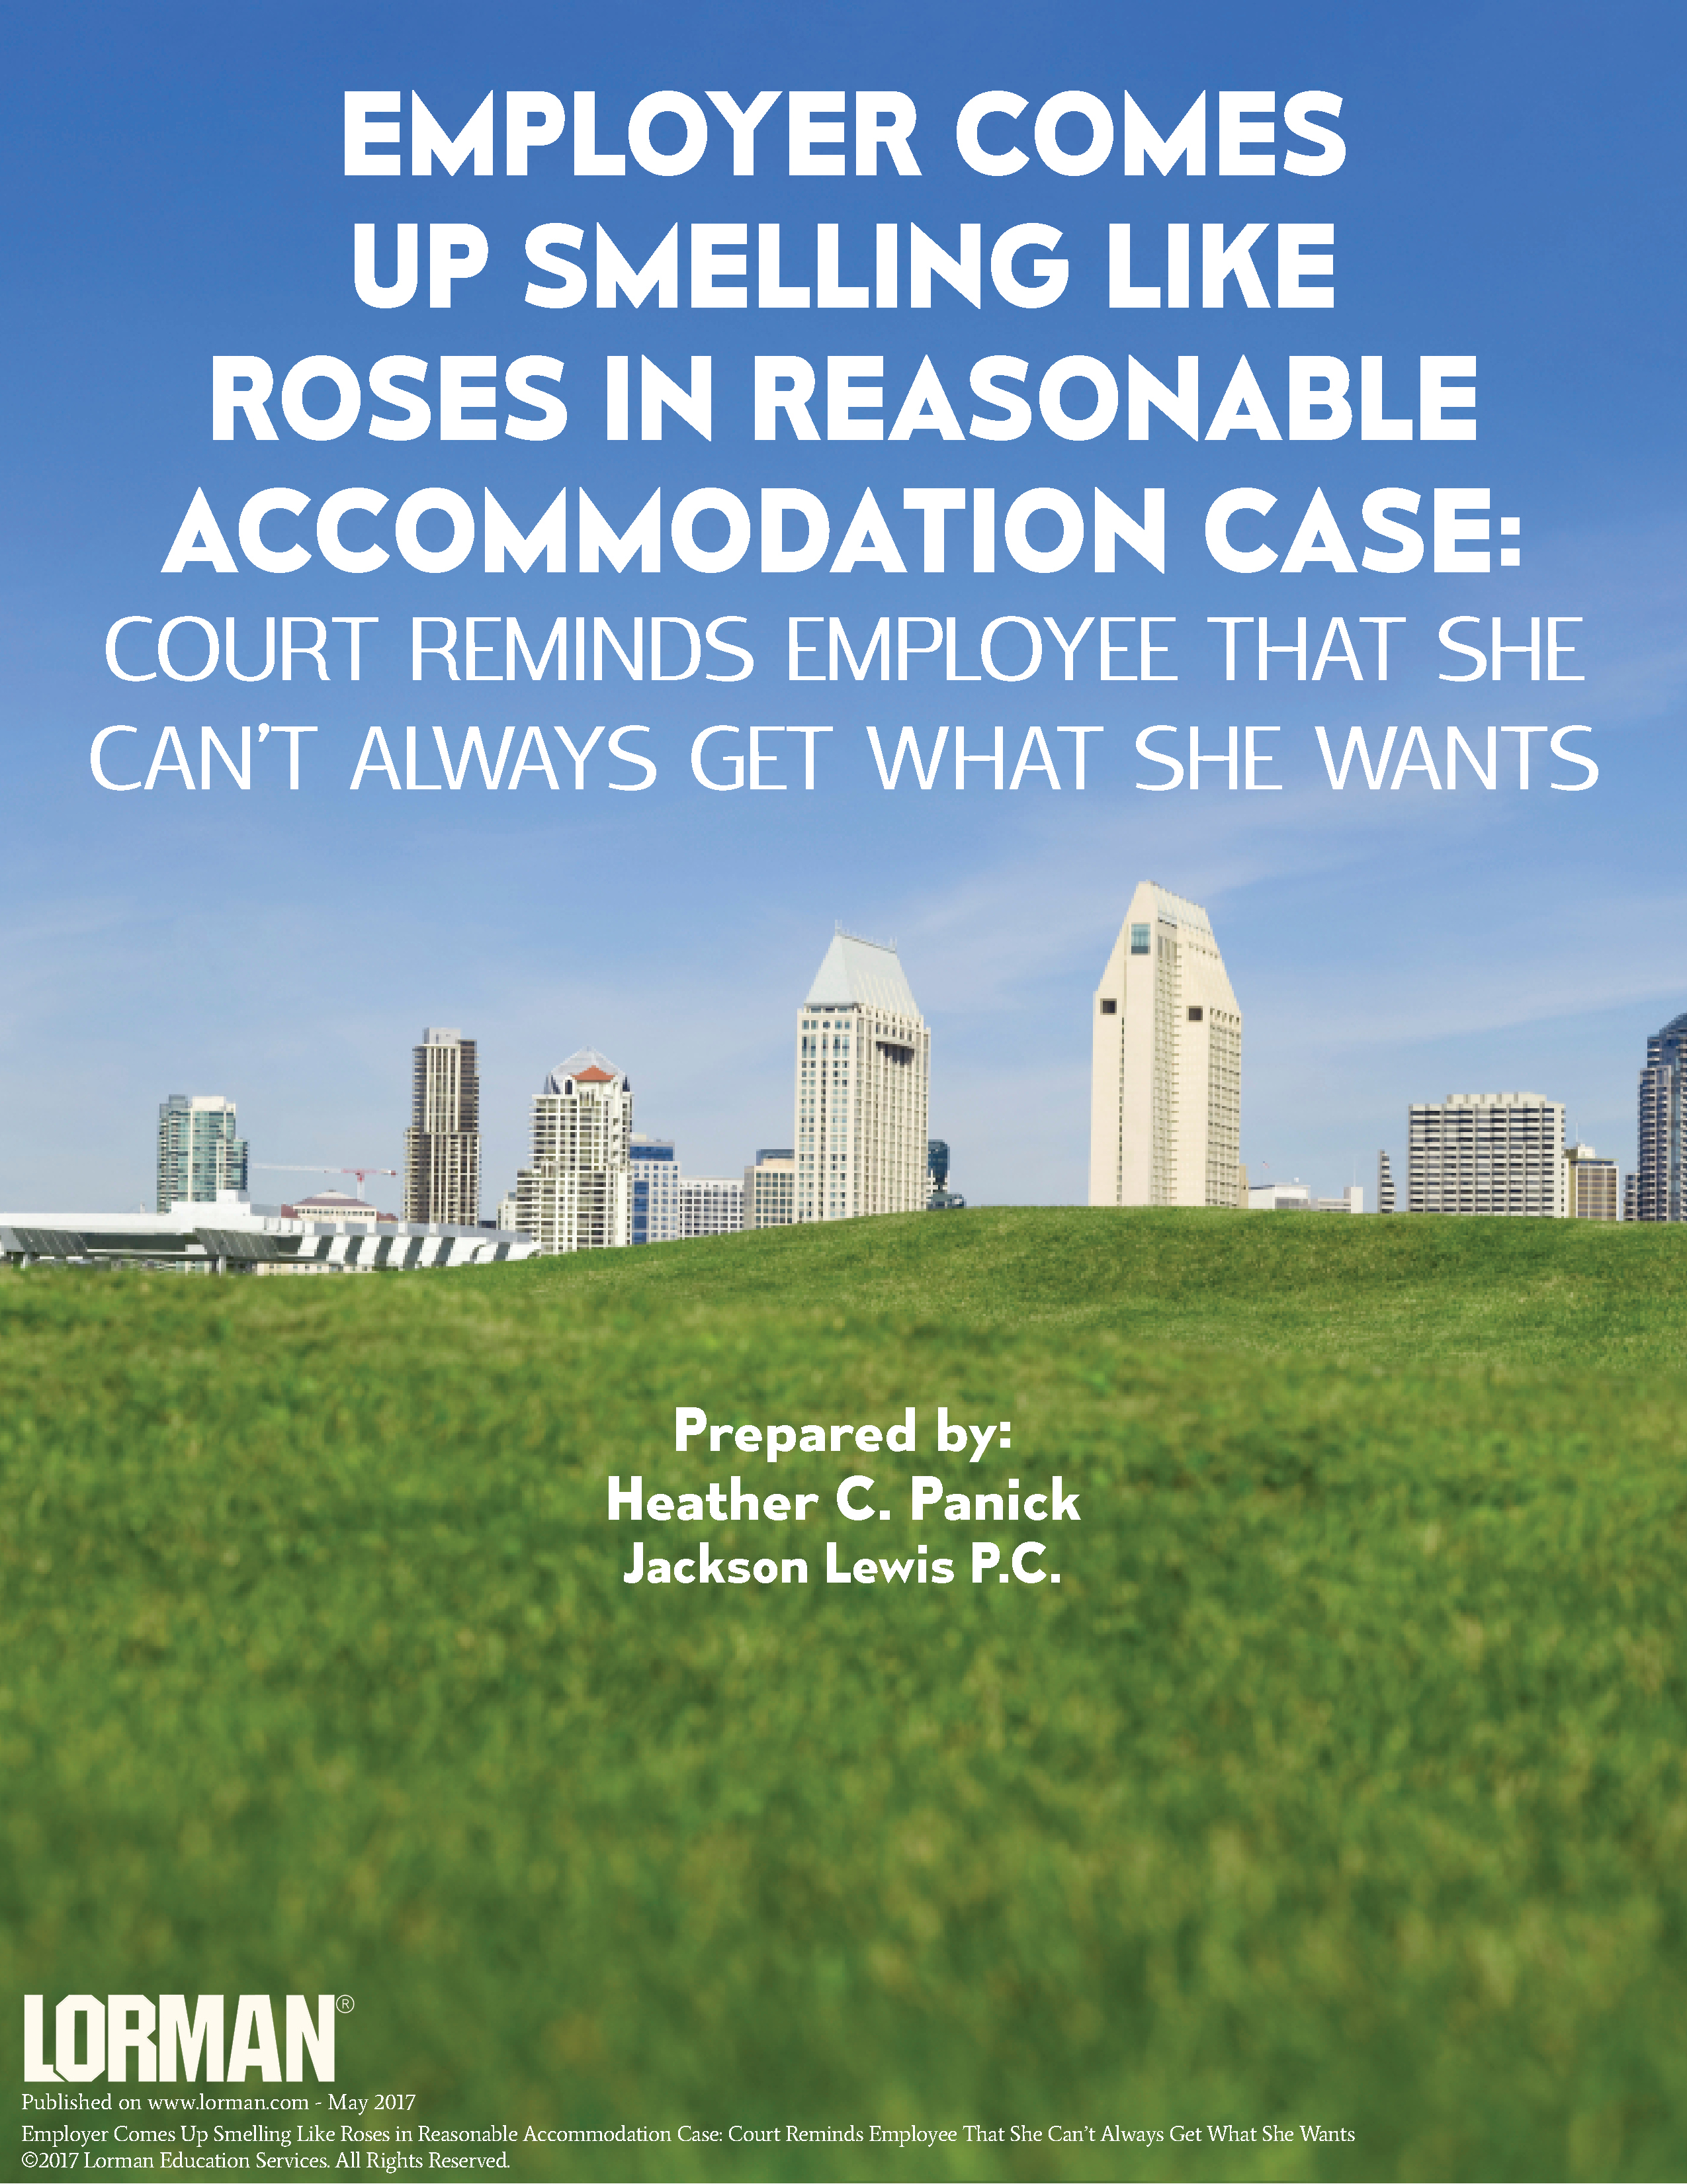 Employer Comes Up Smelling Like Roses in Reasonable Accommodation Case 